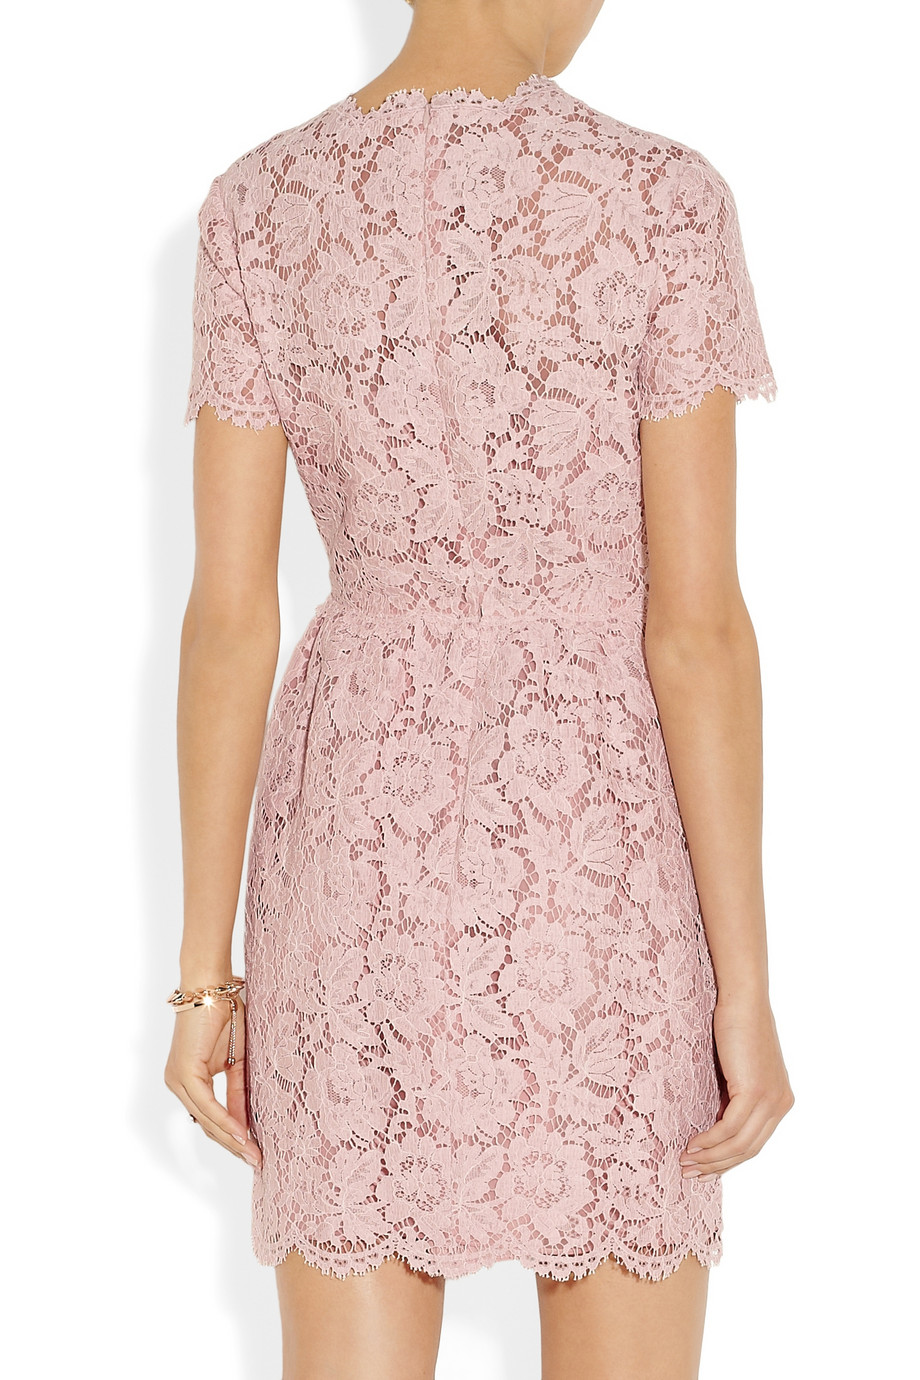 Valentino Cotton Blend Lace Mini Dress in Pink | Lyst